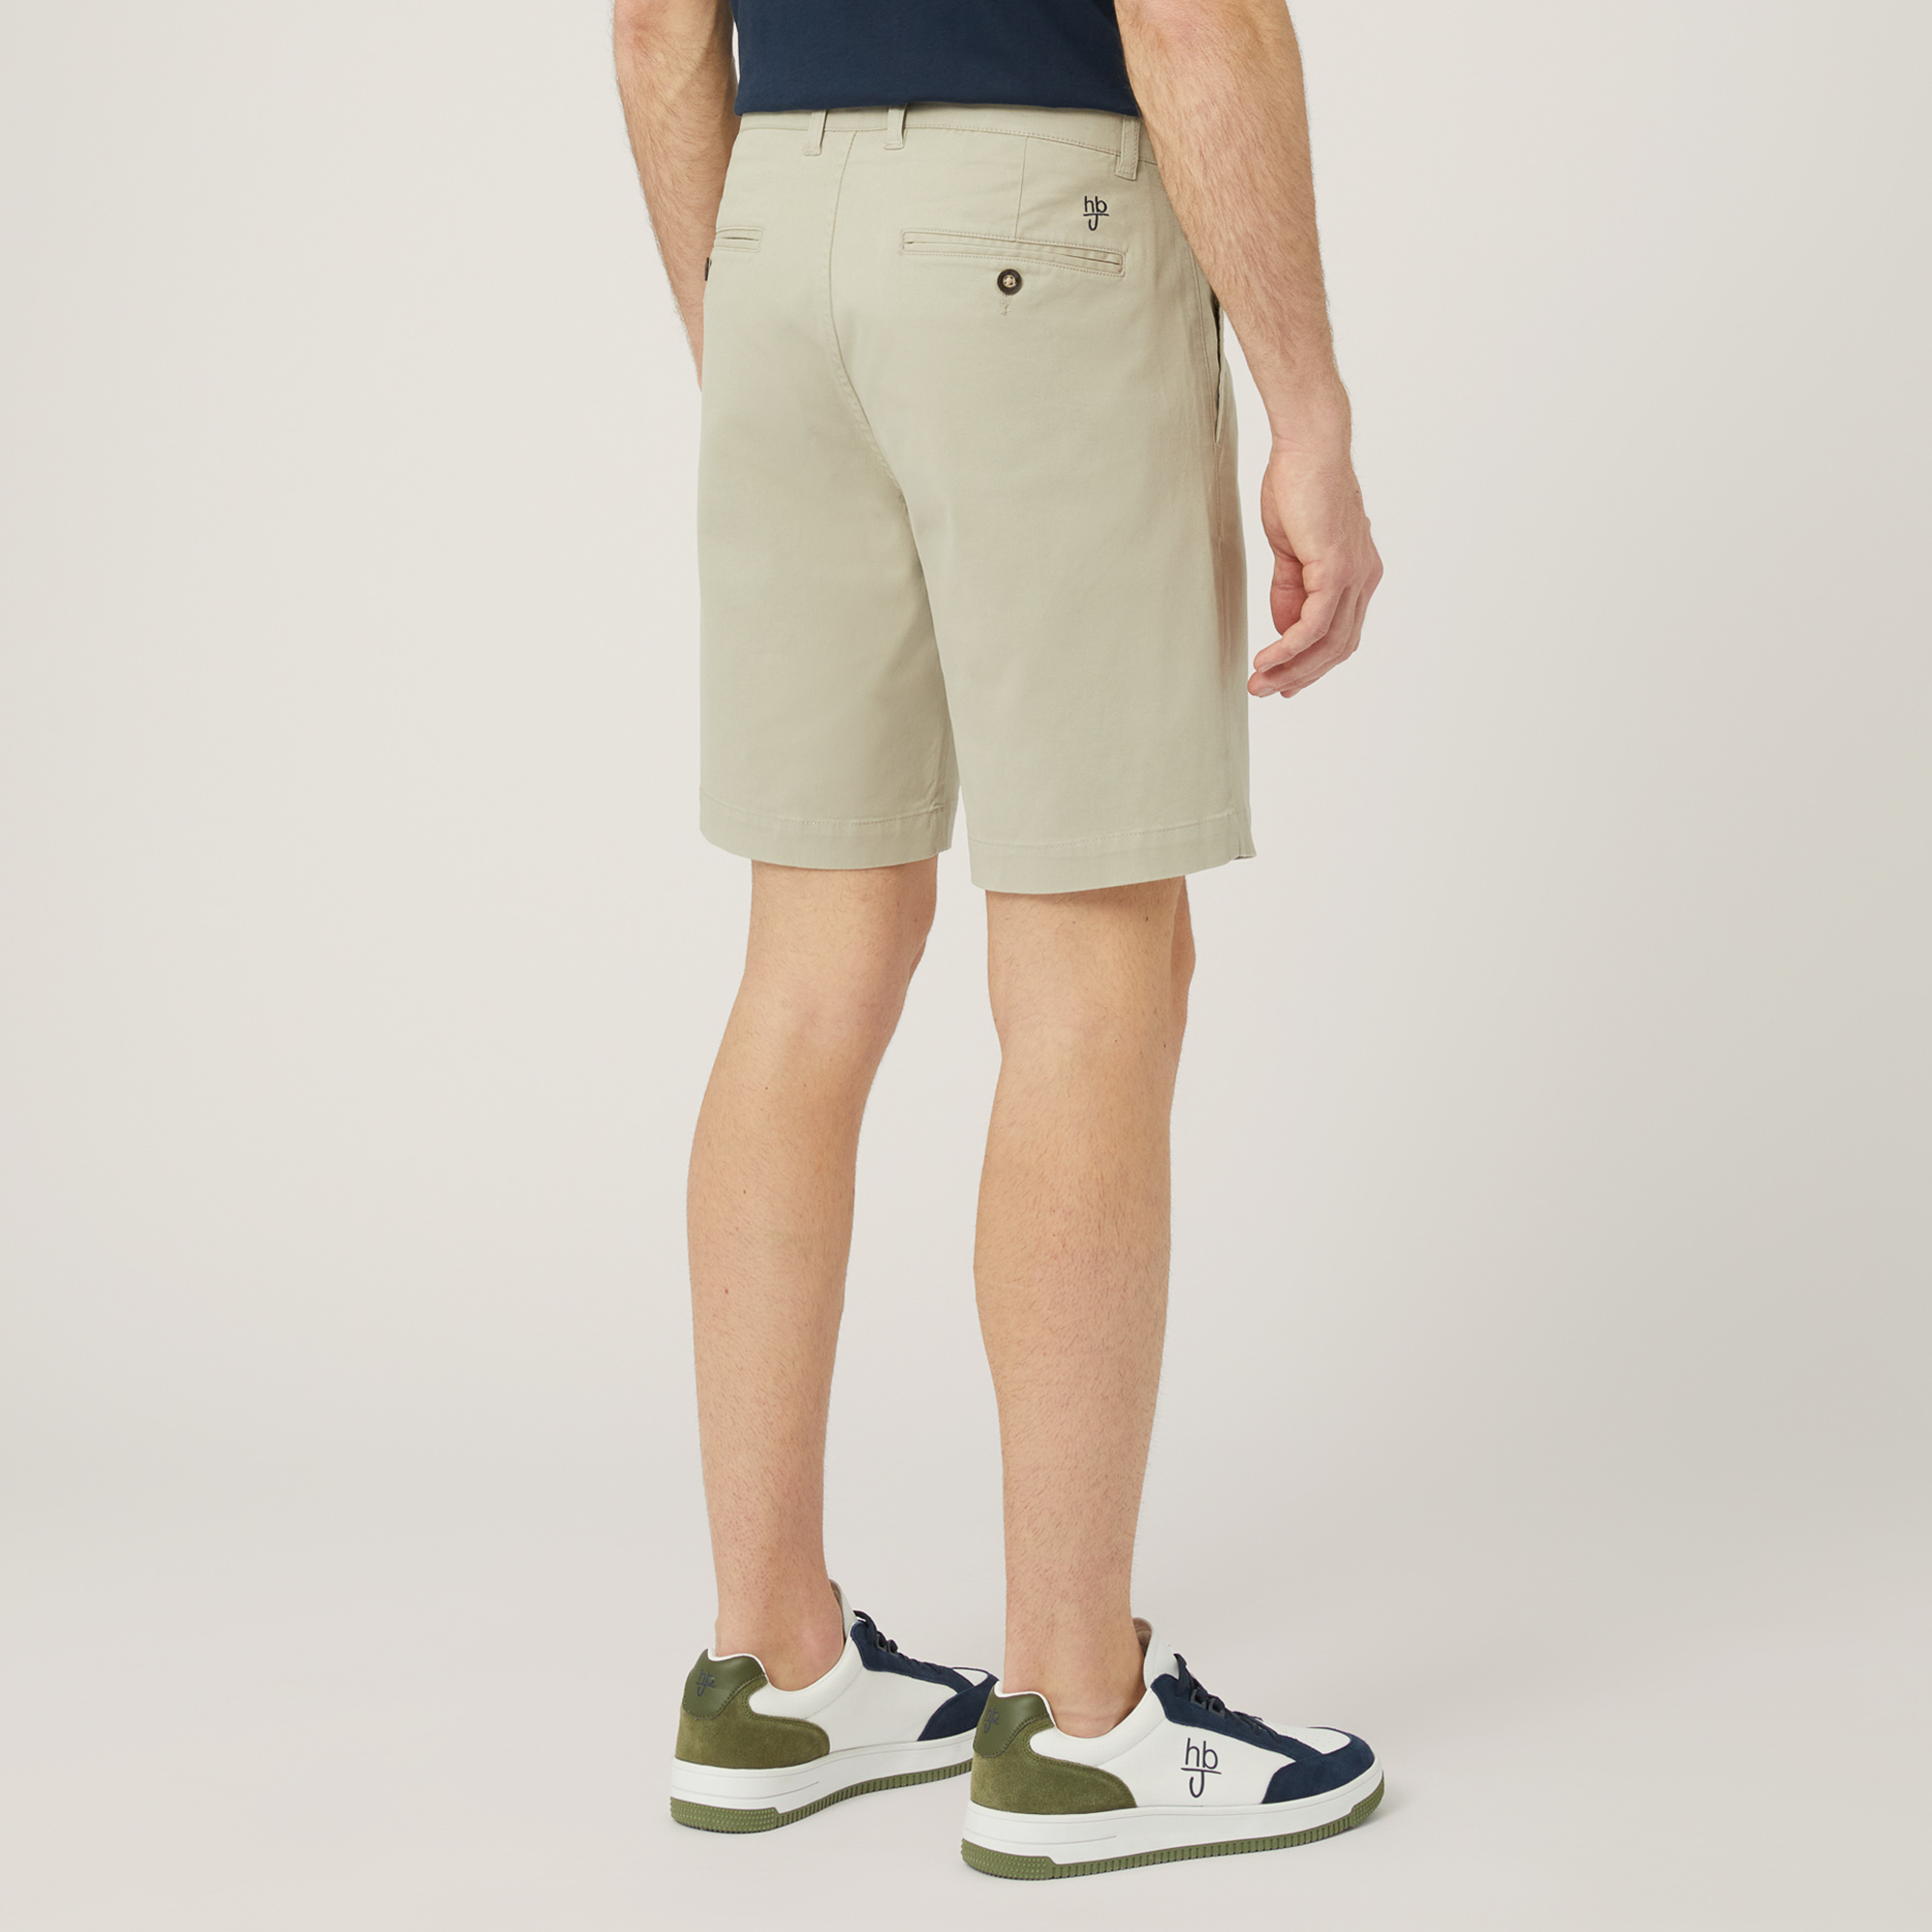 Bermuda Chino In Twill, Beige, large image number 1